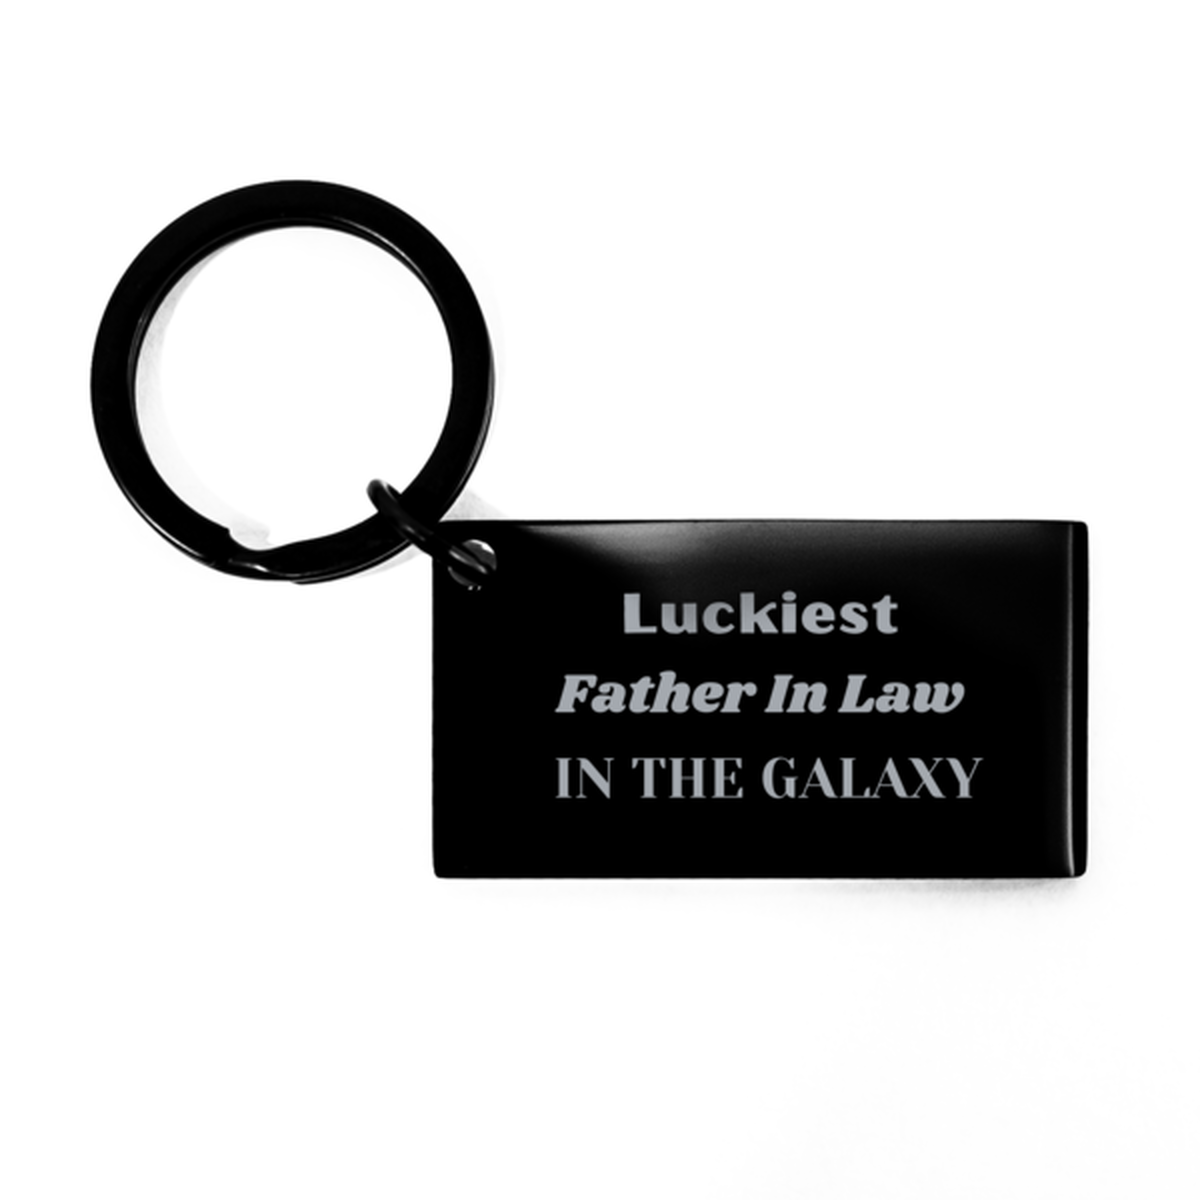 Luckiest Father In Law in the Galaxy, To My Father In Law Engraved Gifts, Christmas Father In Law Keychain Gifts, X-mas Birthday Unique Gifts For Father In Law Men Women